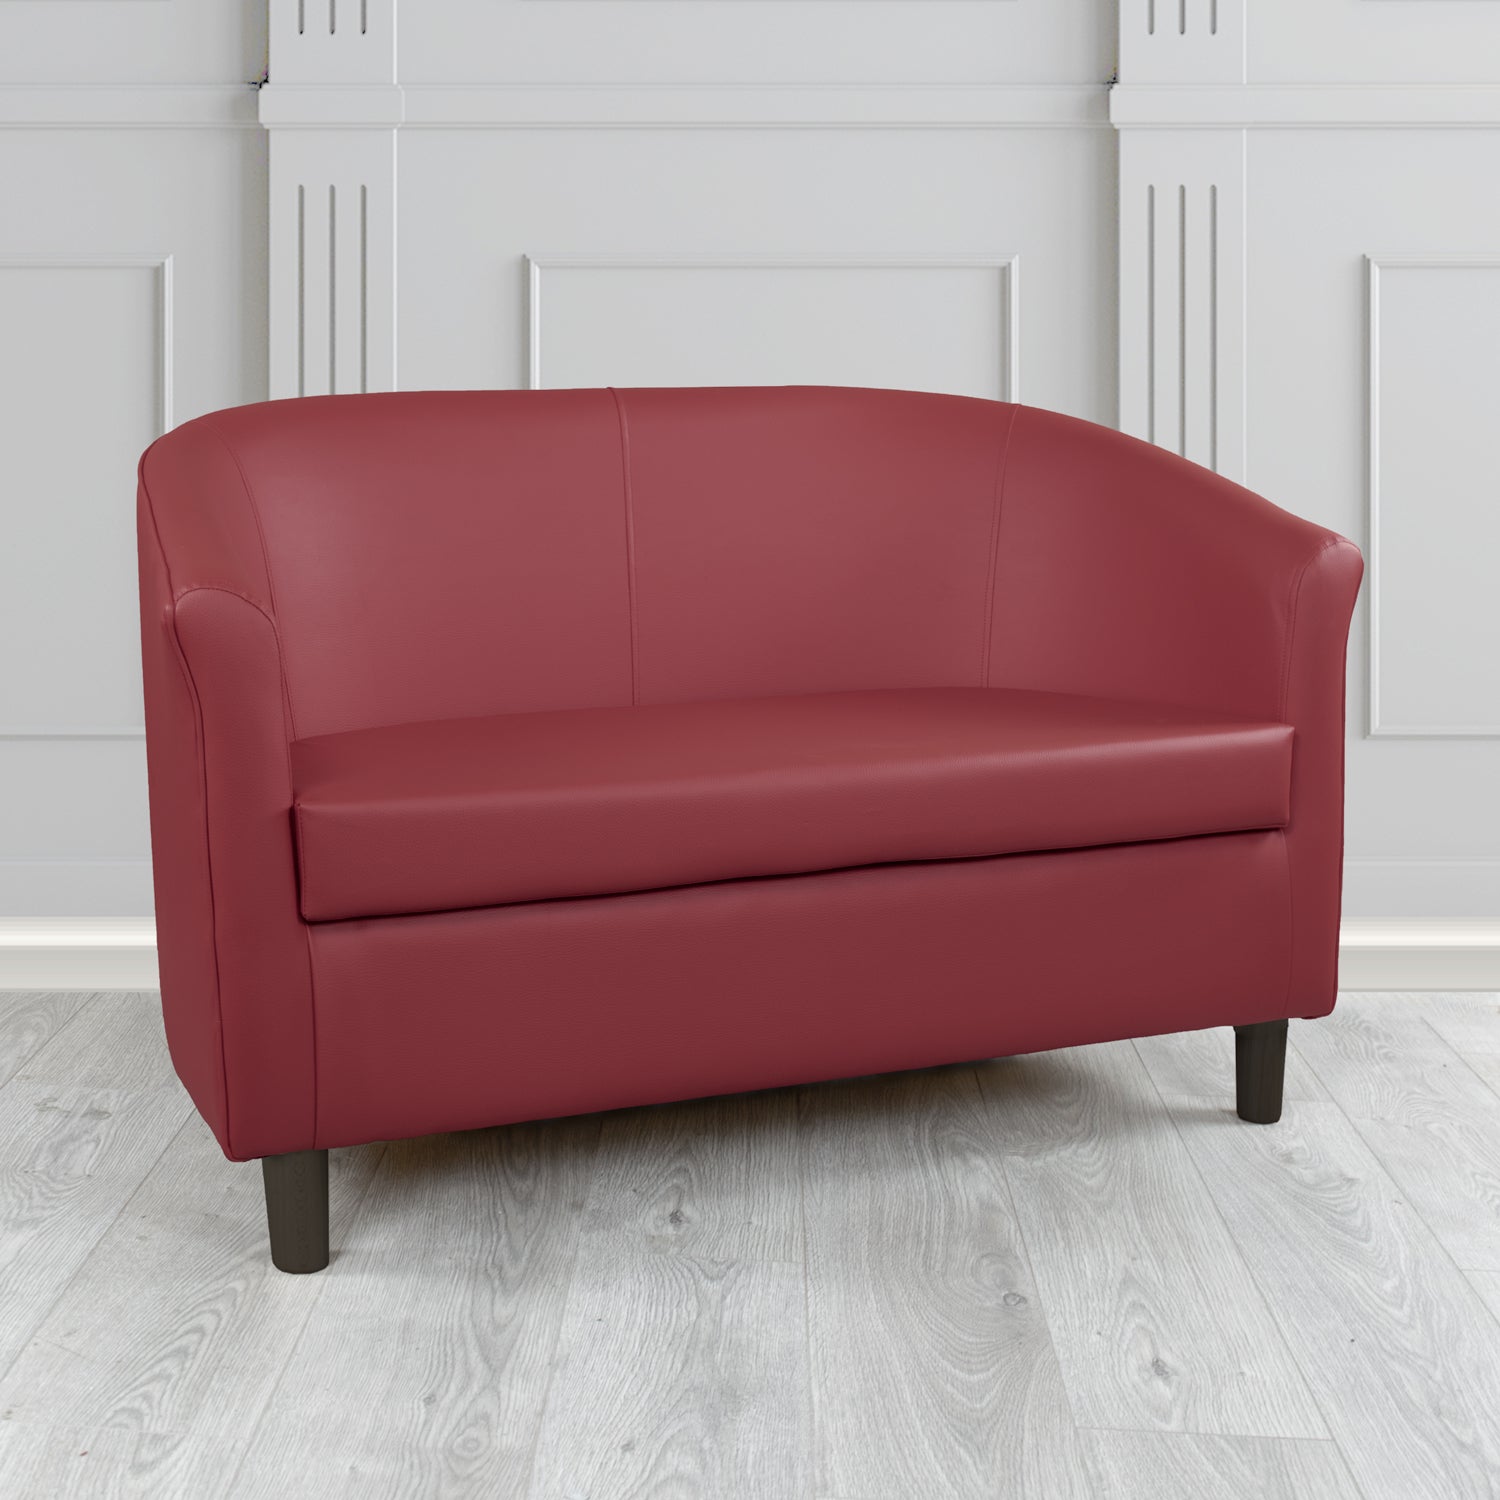 Tuscany Just Colour Mulled Wine Crib 5 Faux Leather 2 Seater Tub Sofa - The Tub Chair Shop